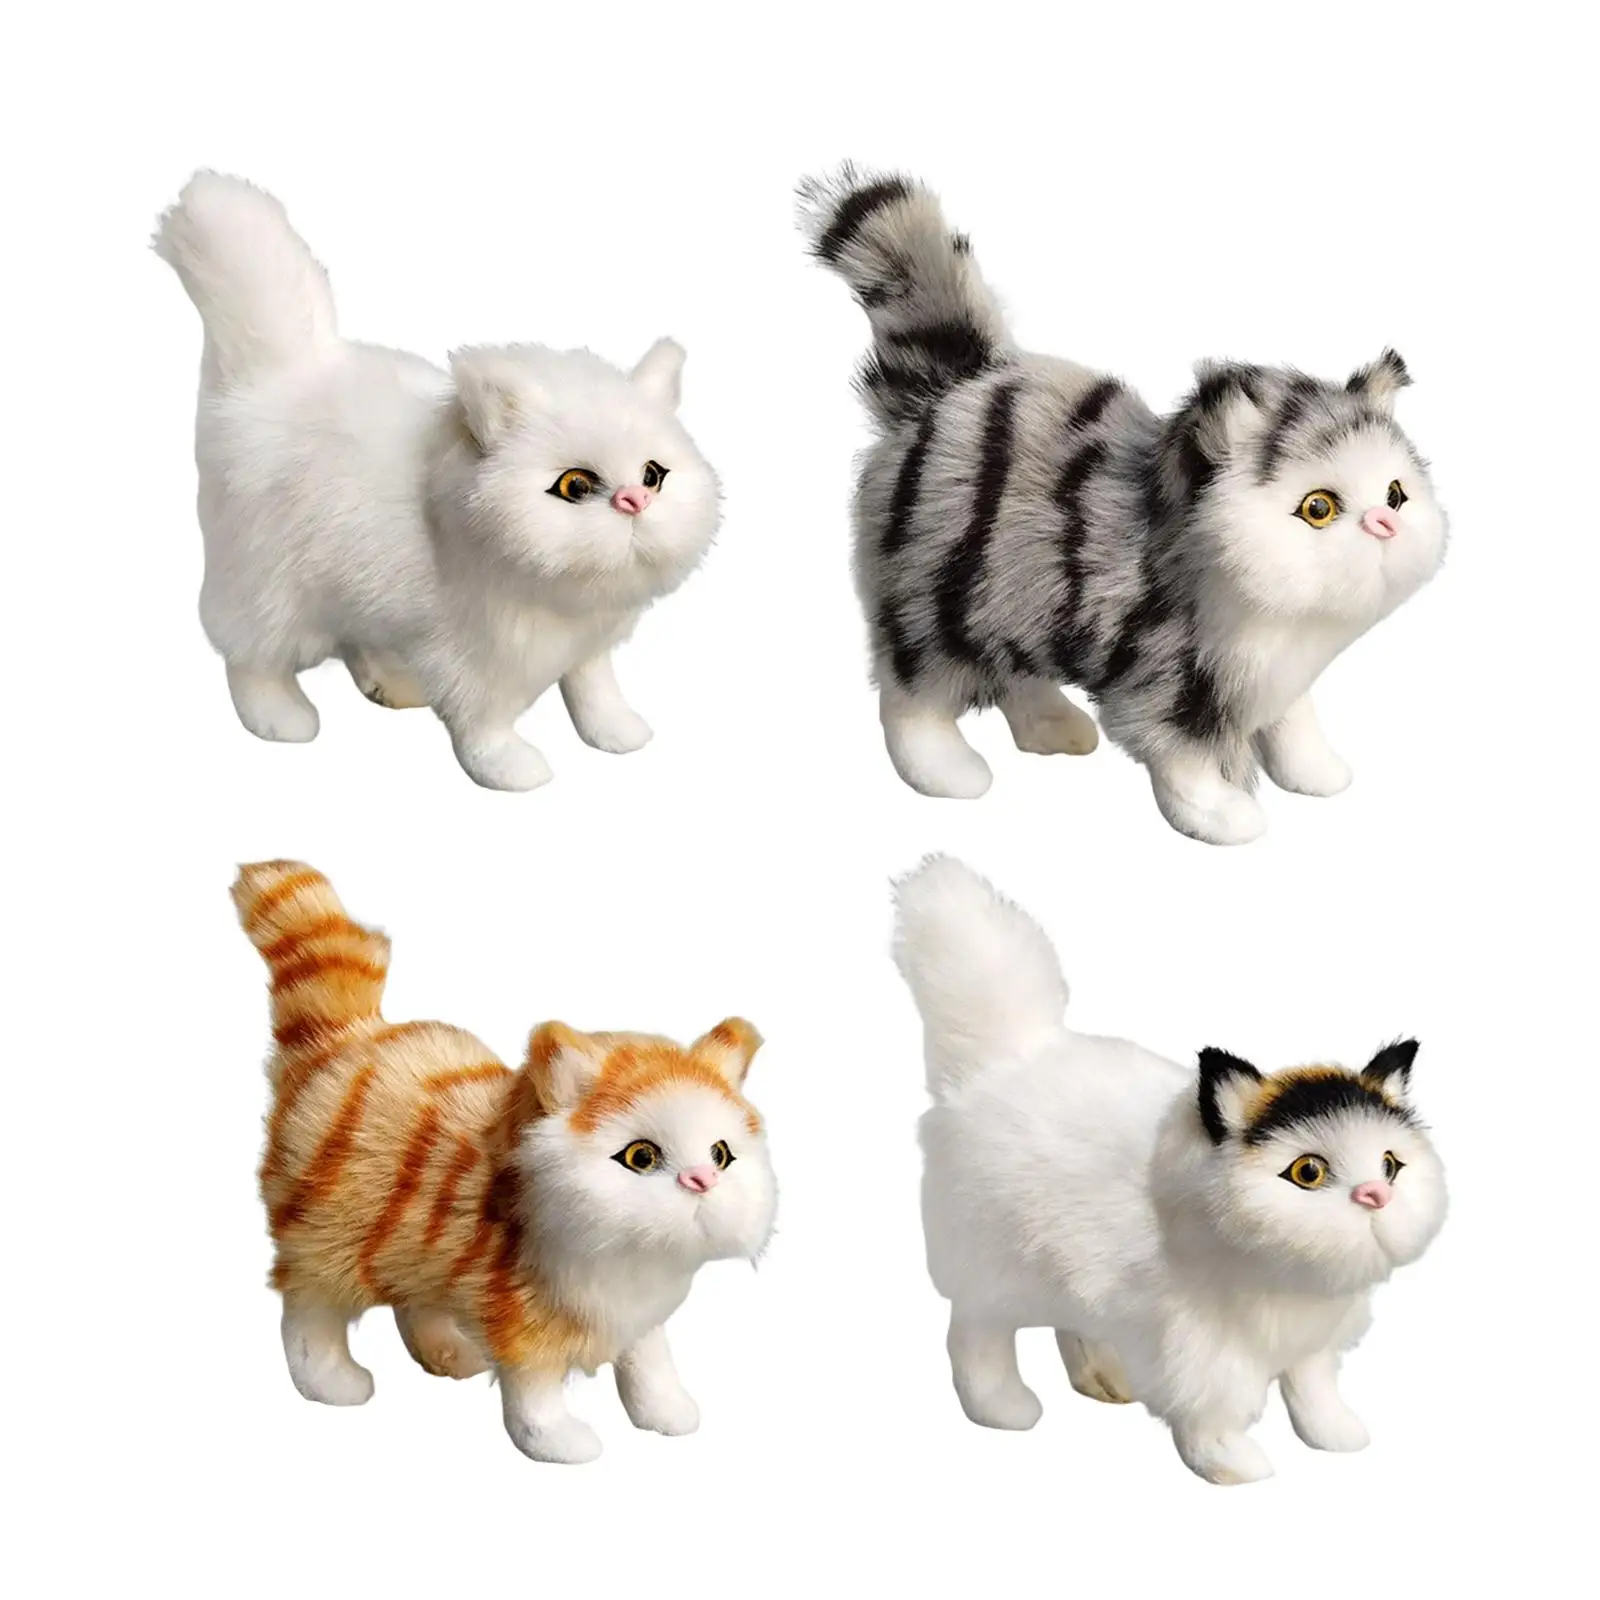 Miniature Simulation Cat Figures Collection Crafts for Bedroom Tabletop